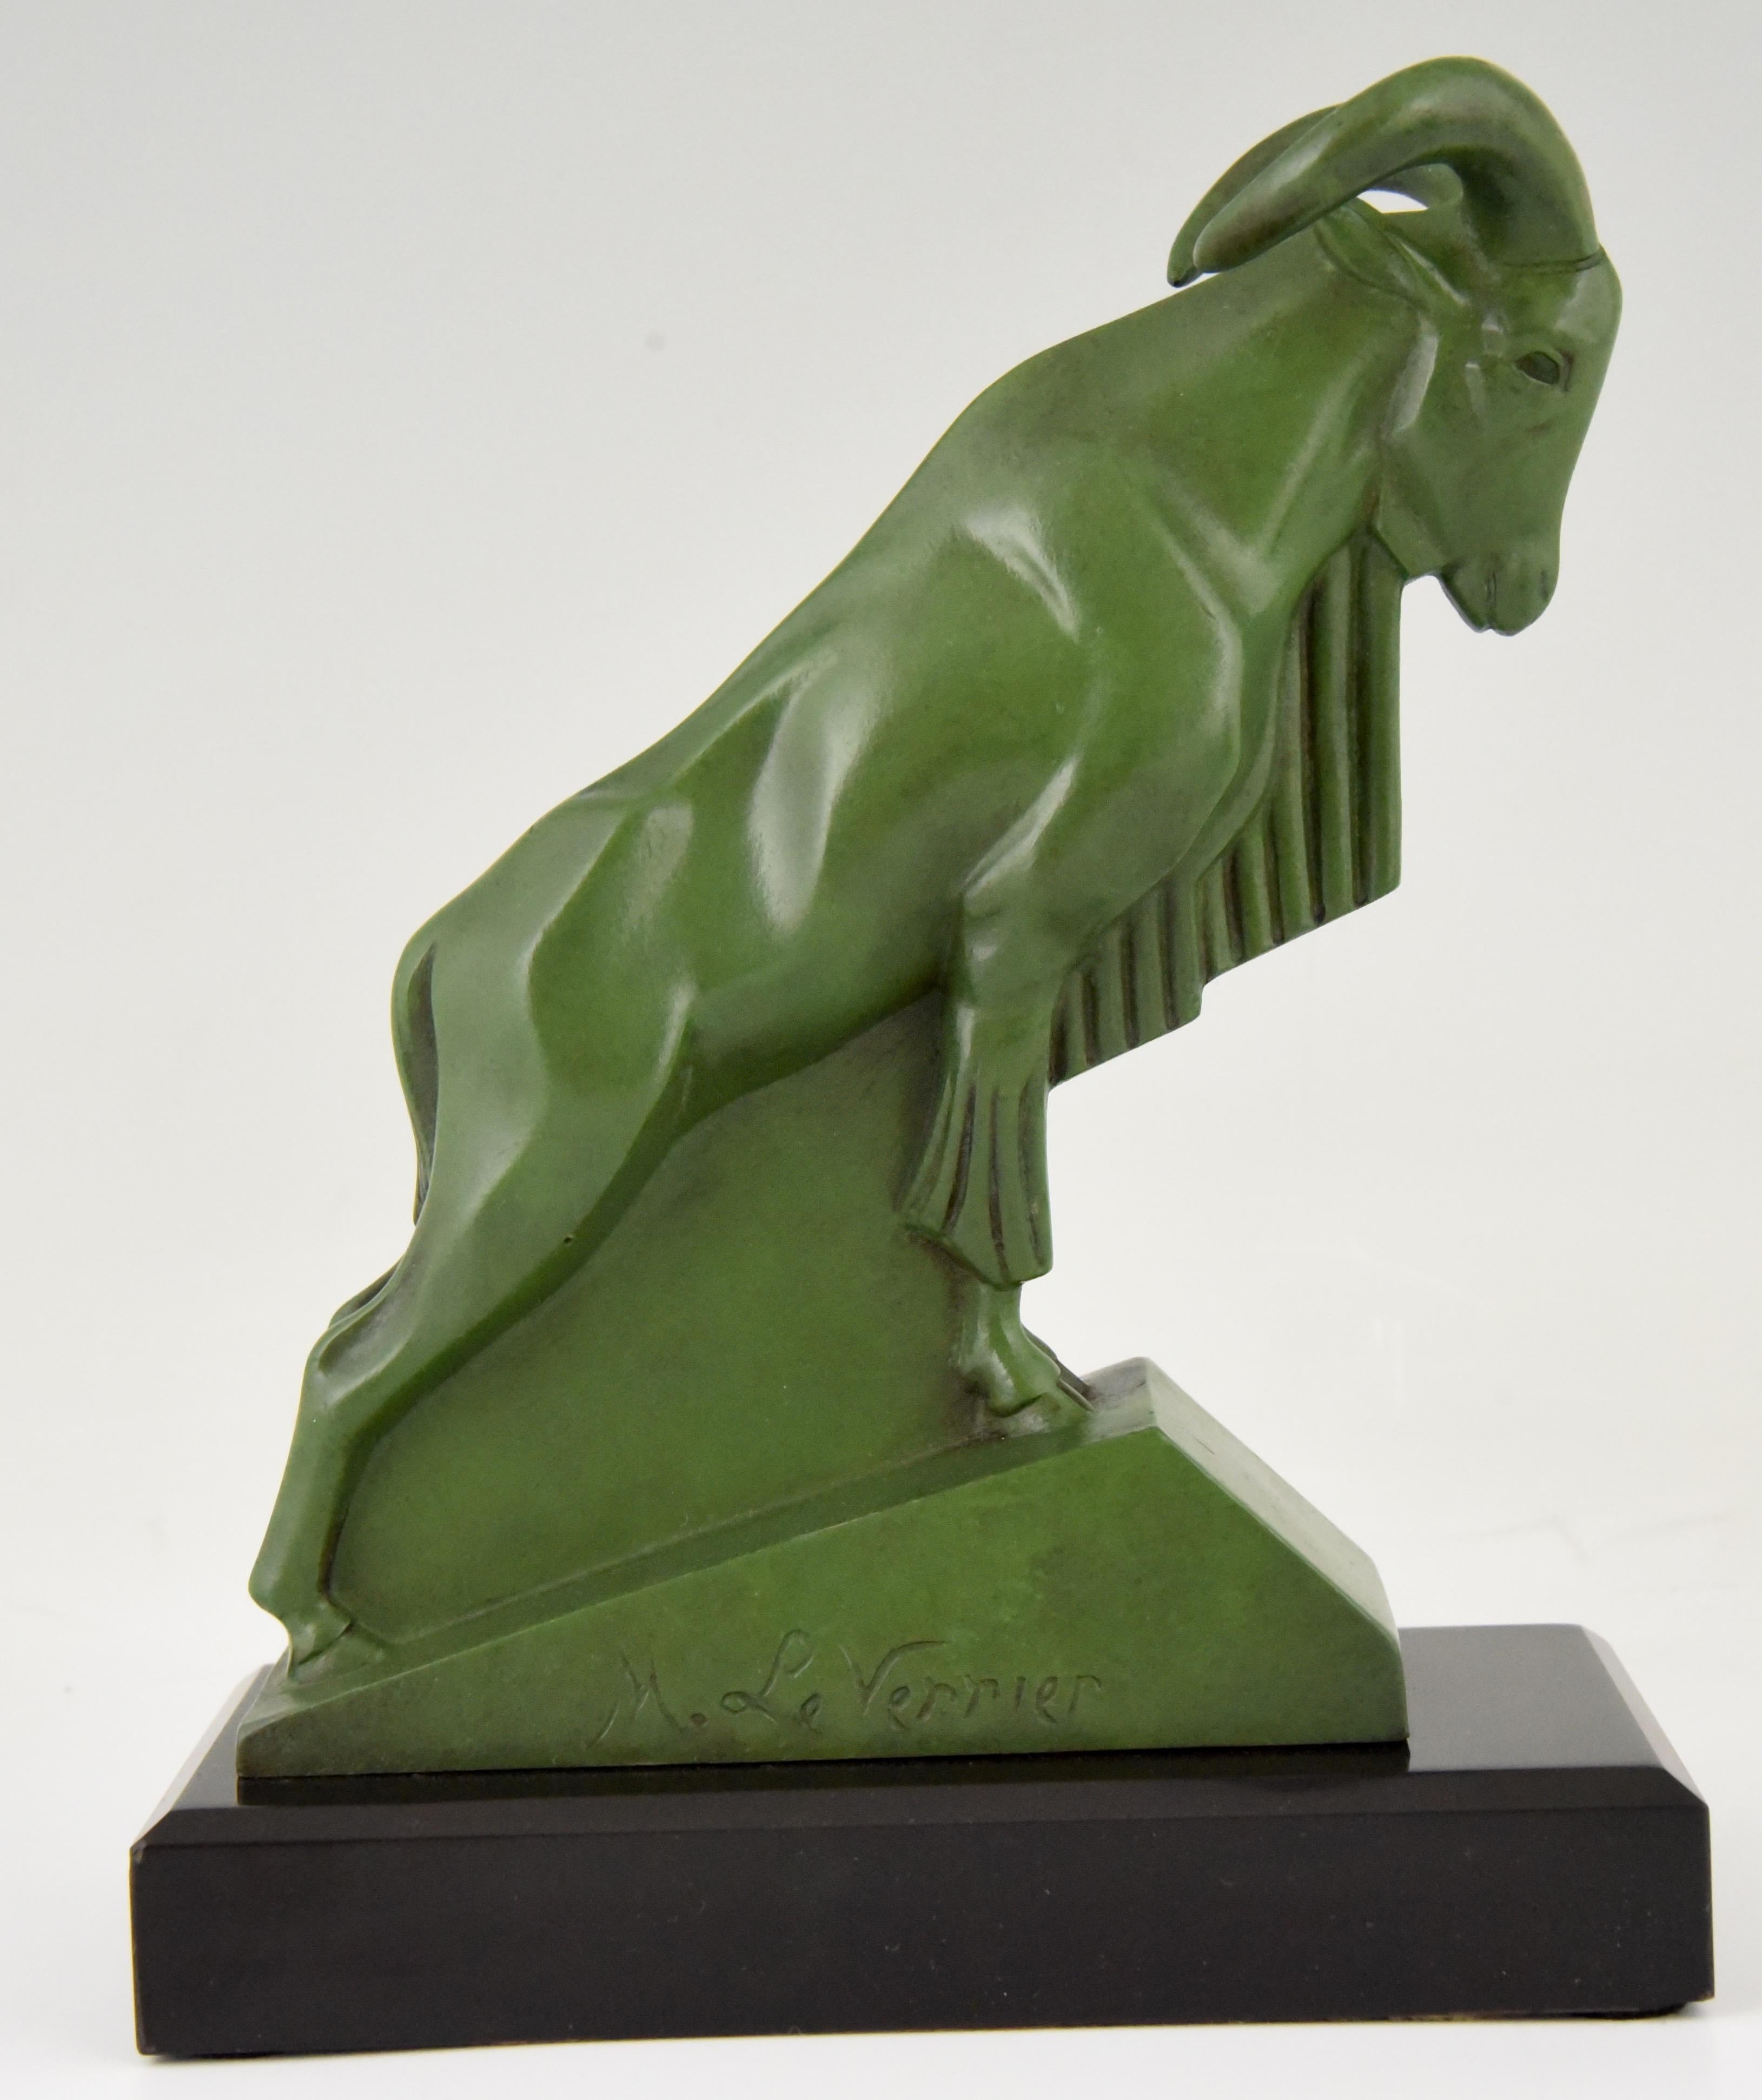 20th Century Art Deco Ibex or Ram Bookends Max Le Verrier France, 1930